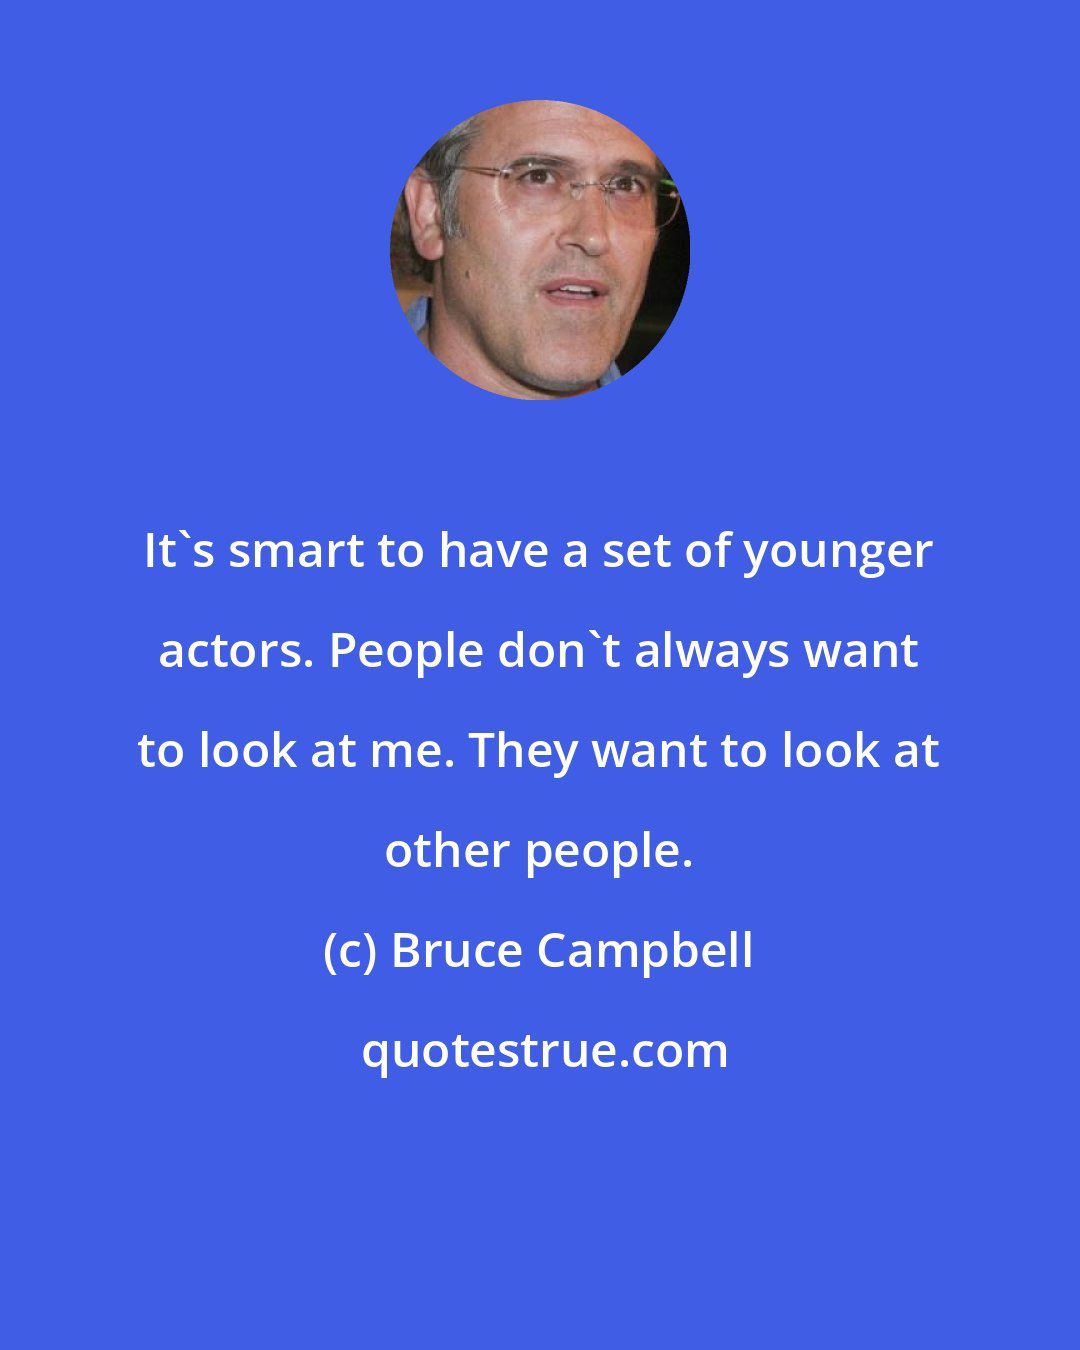 Bruce Campbell: It's smart to have a set of younger actors. People don't always want to look at me. They want to look at other people.